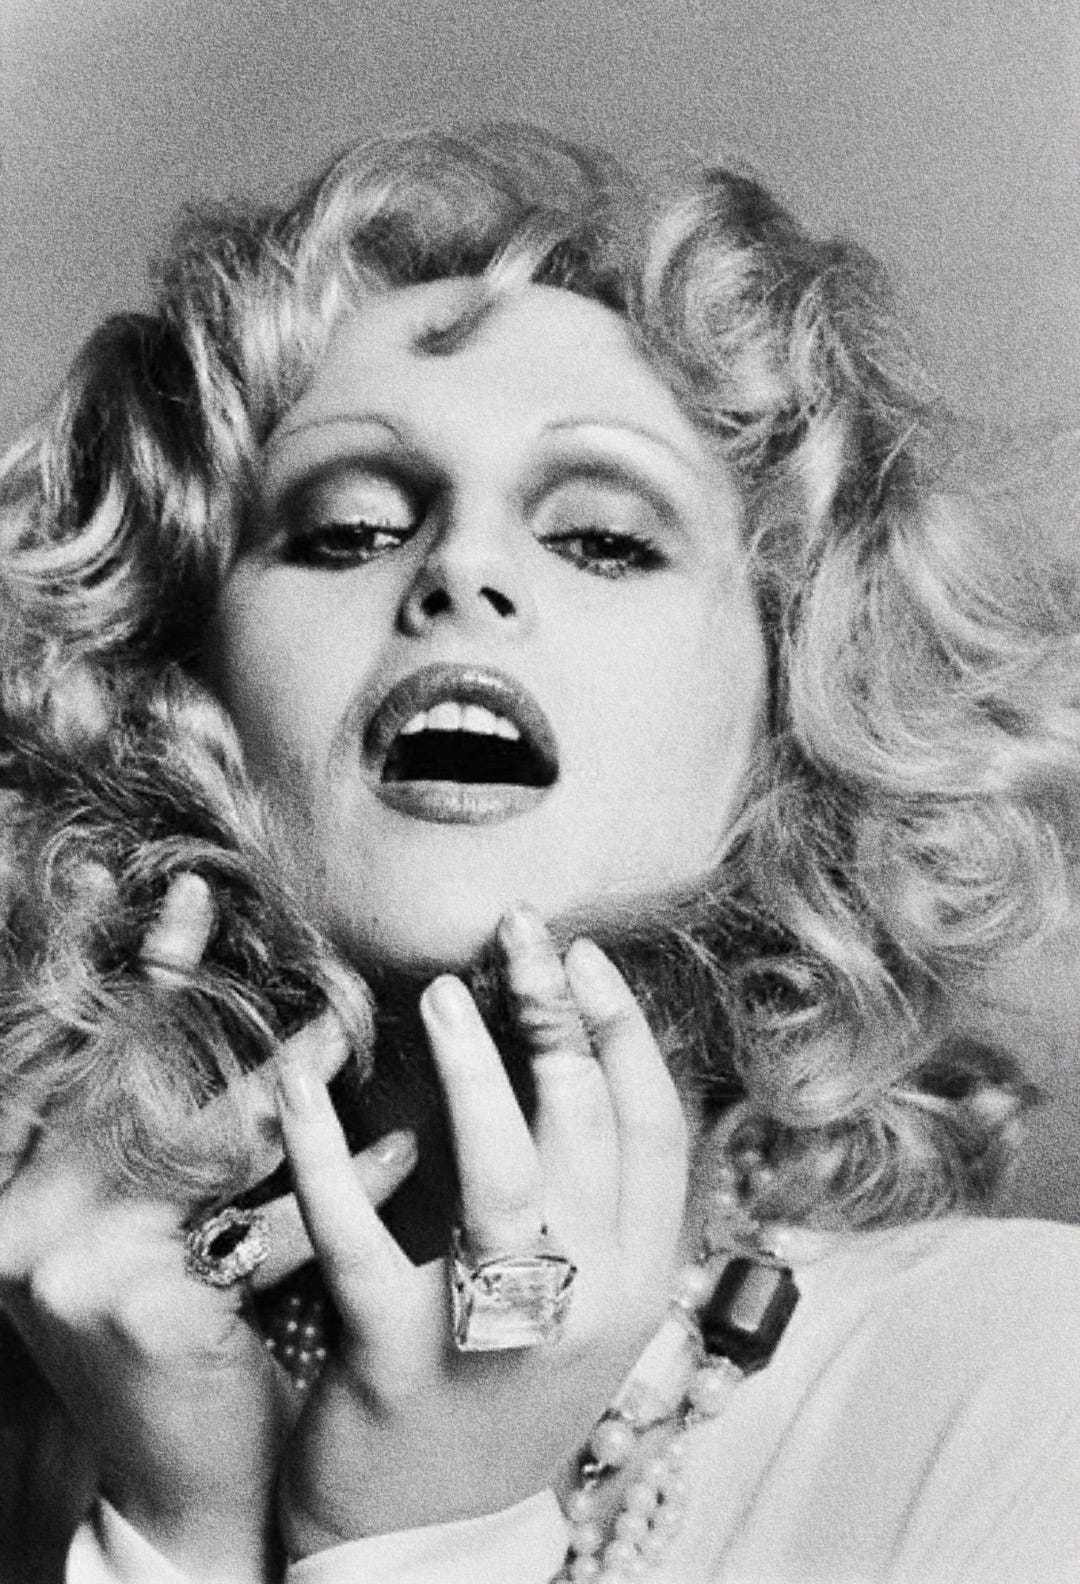 Candy says…” The Life and Legacy of Candy Darling by Parmis Etez Medium